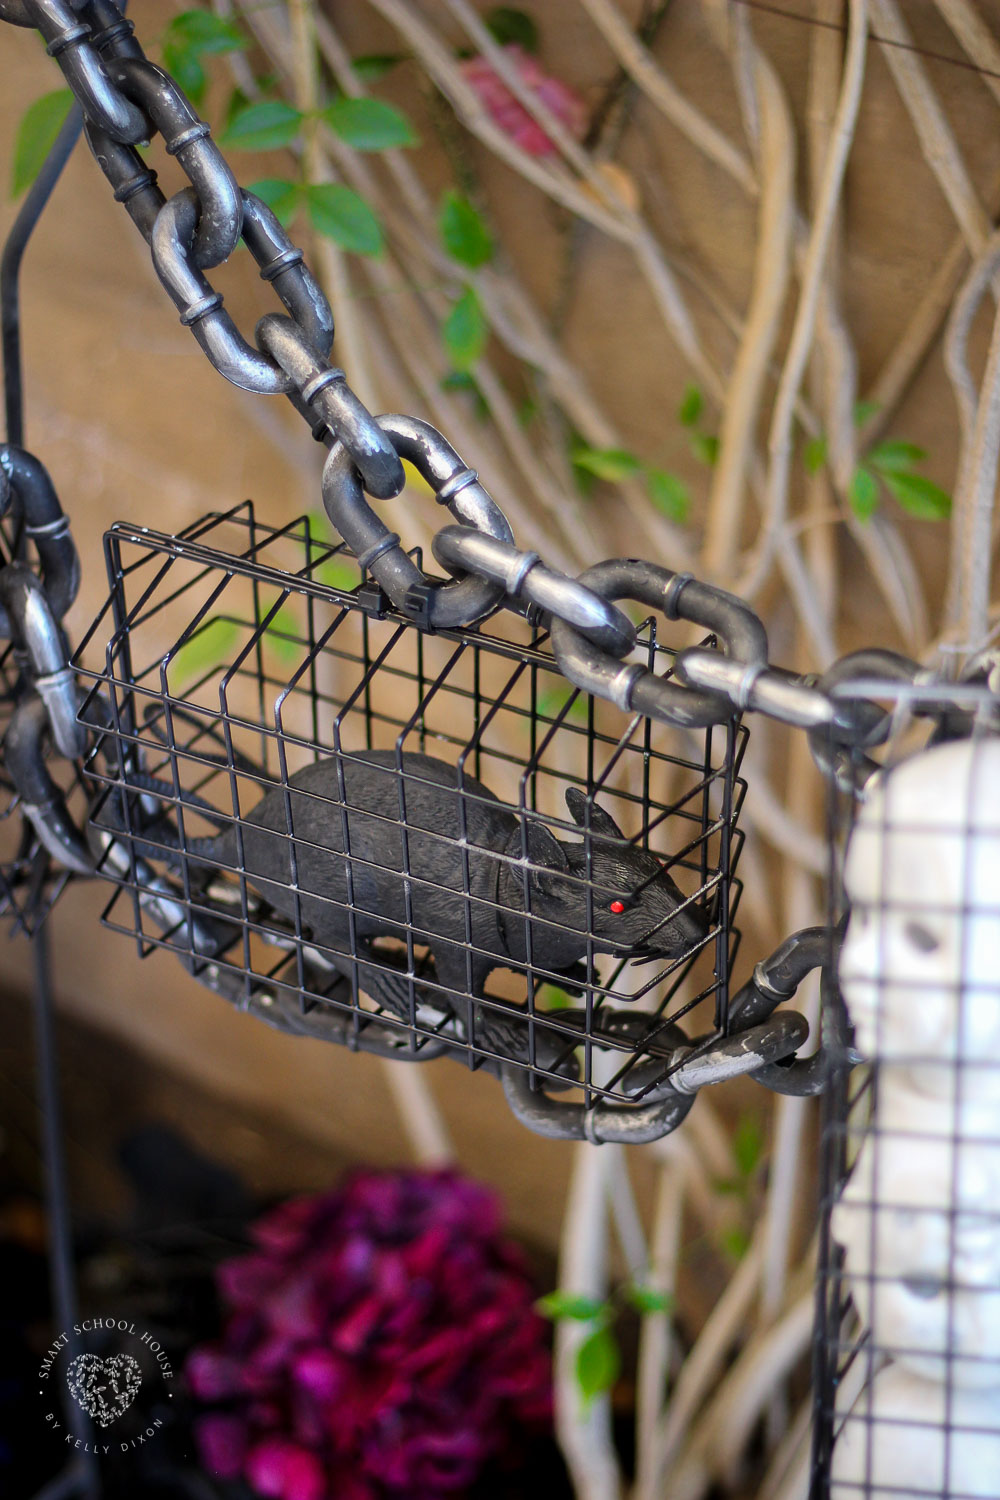 Hanging Cages for Halloween using baskets from the Dollar Store!